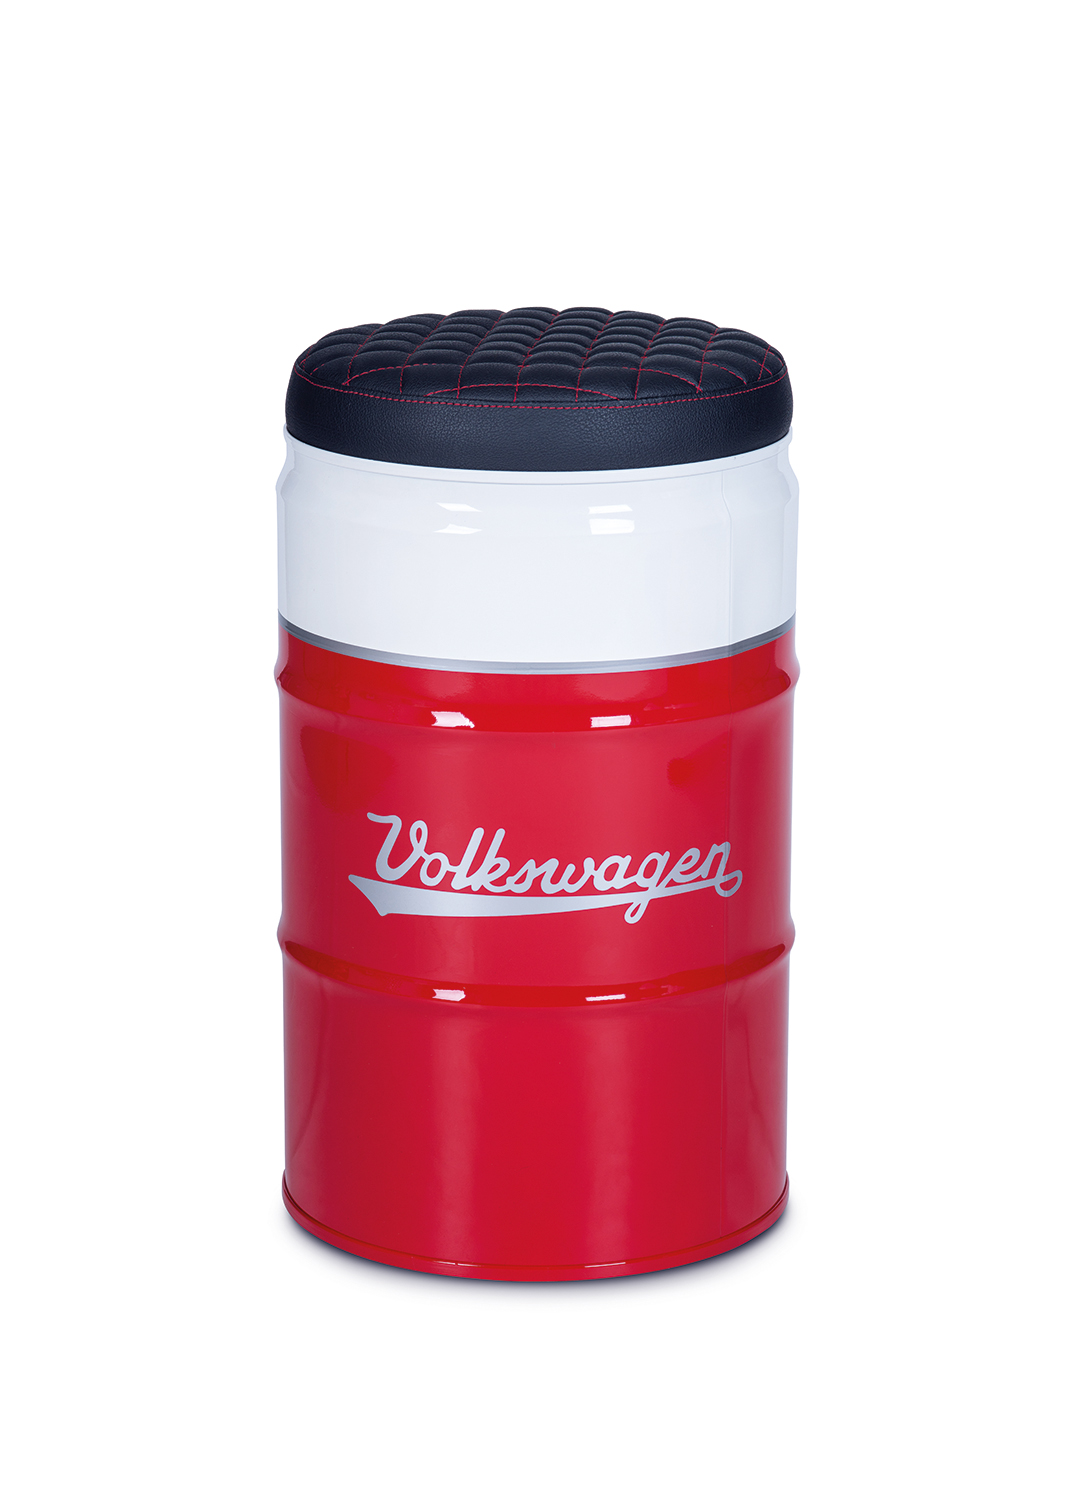 VW T1 Bus oil drum stool with storage space